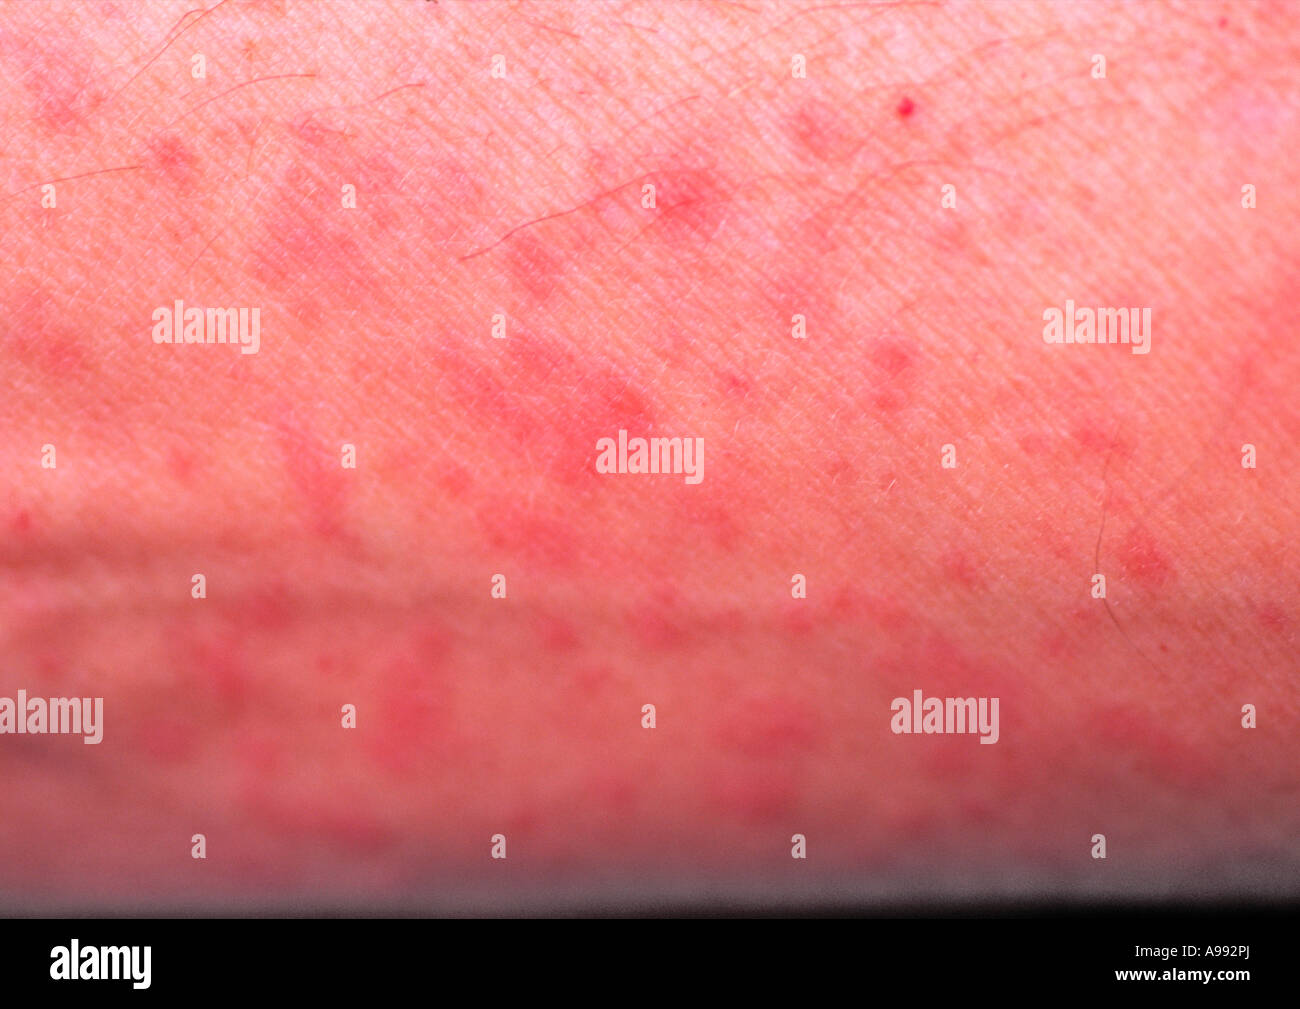 rash on a arm caused by allergy or disease Stock Photo